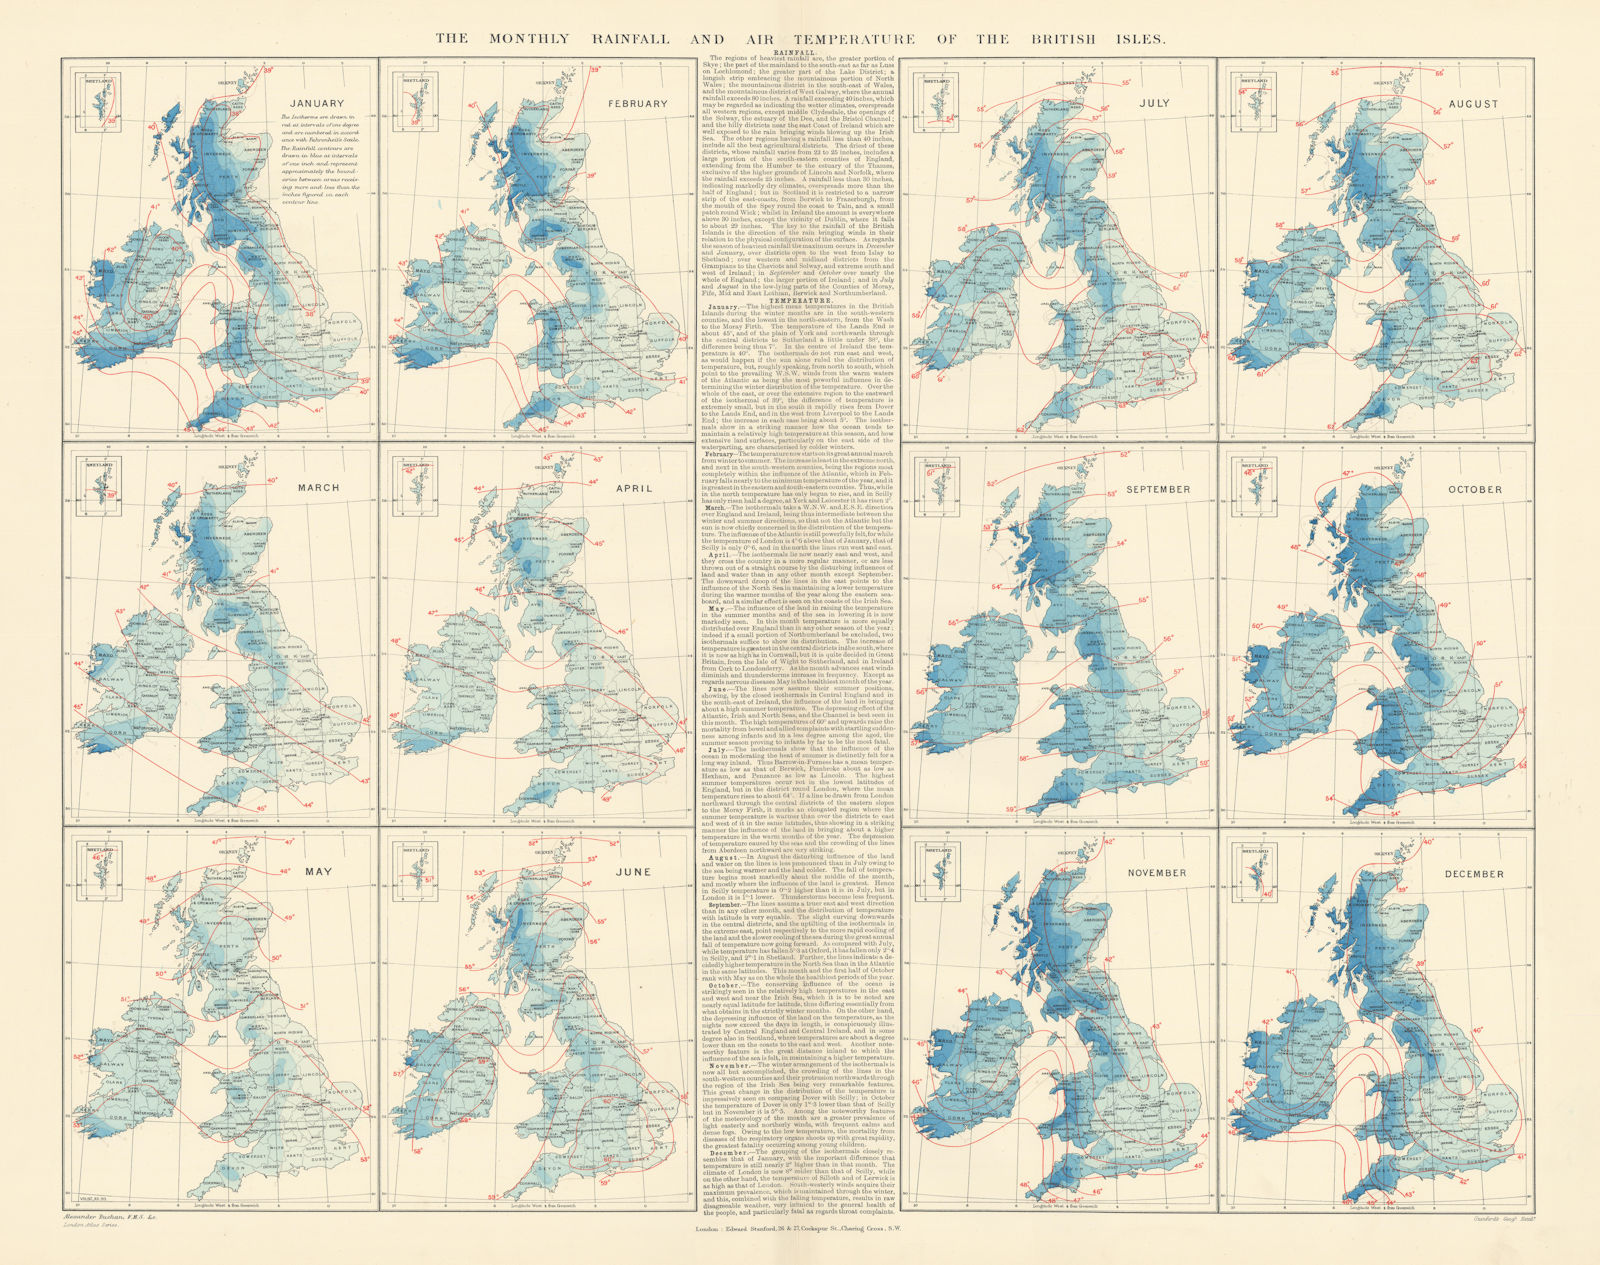 Associate Product British Isles. Monthly rainfall & air temperature. 61x55cm. STANFORD 1896 map